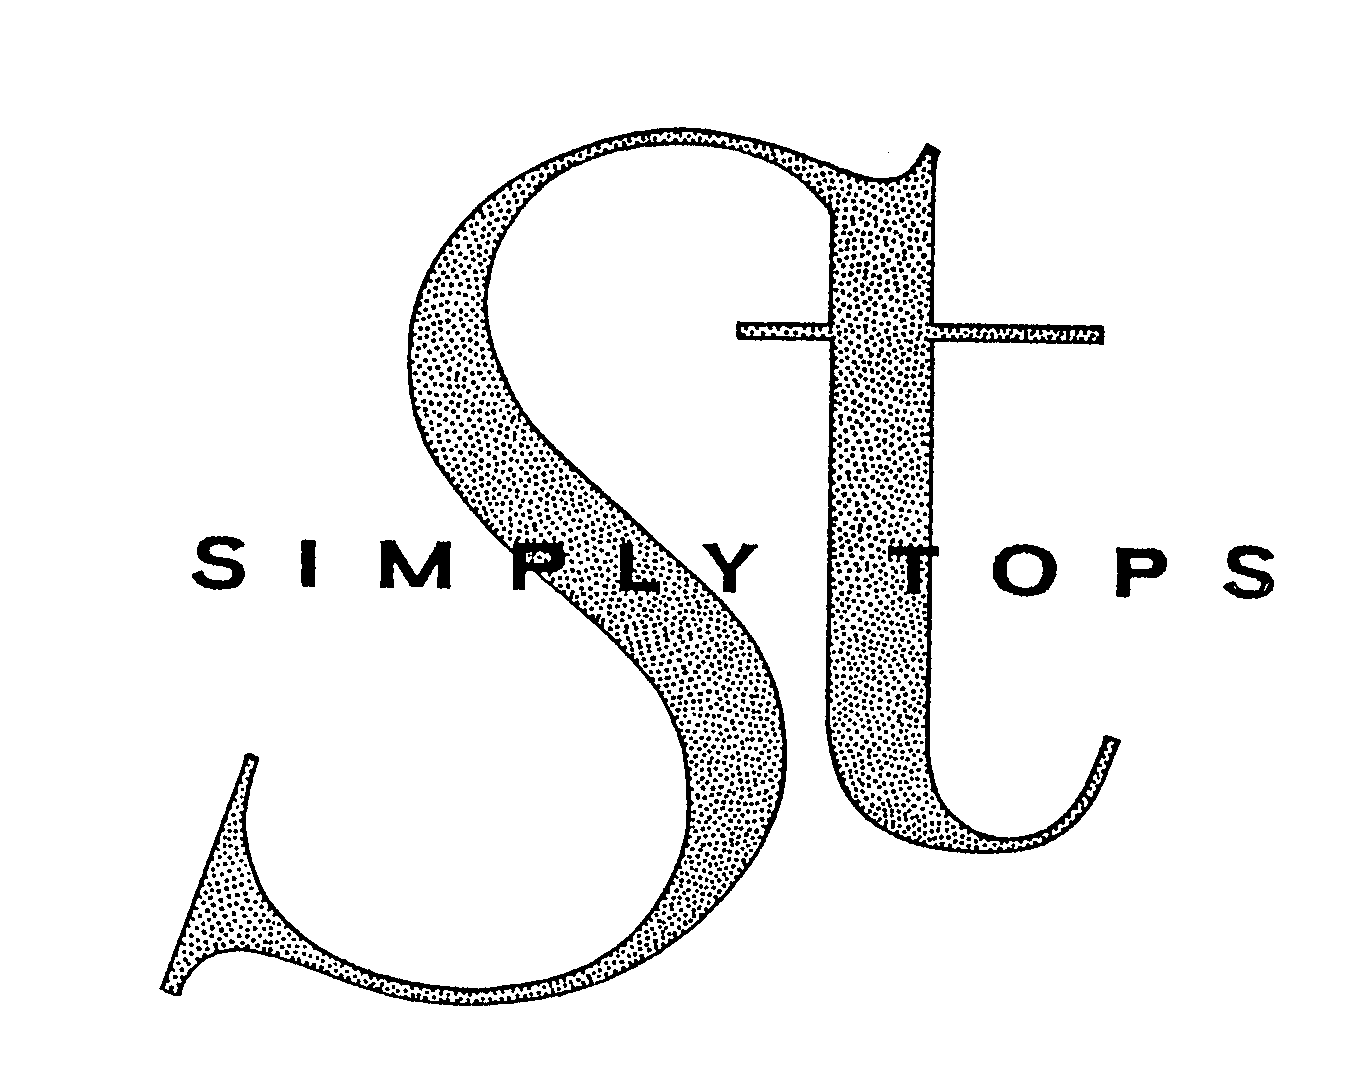  ST SIMPLY TOPS